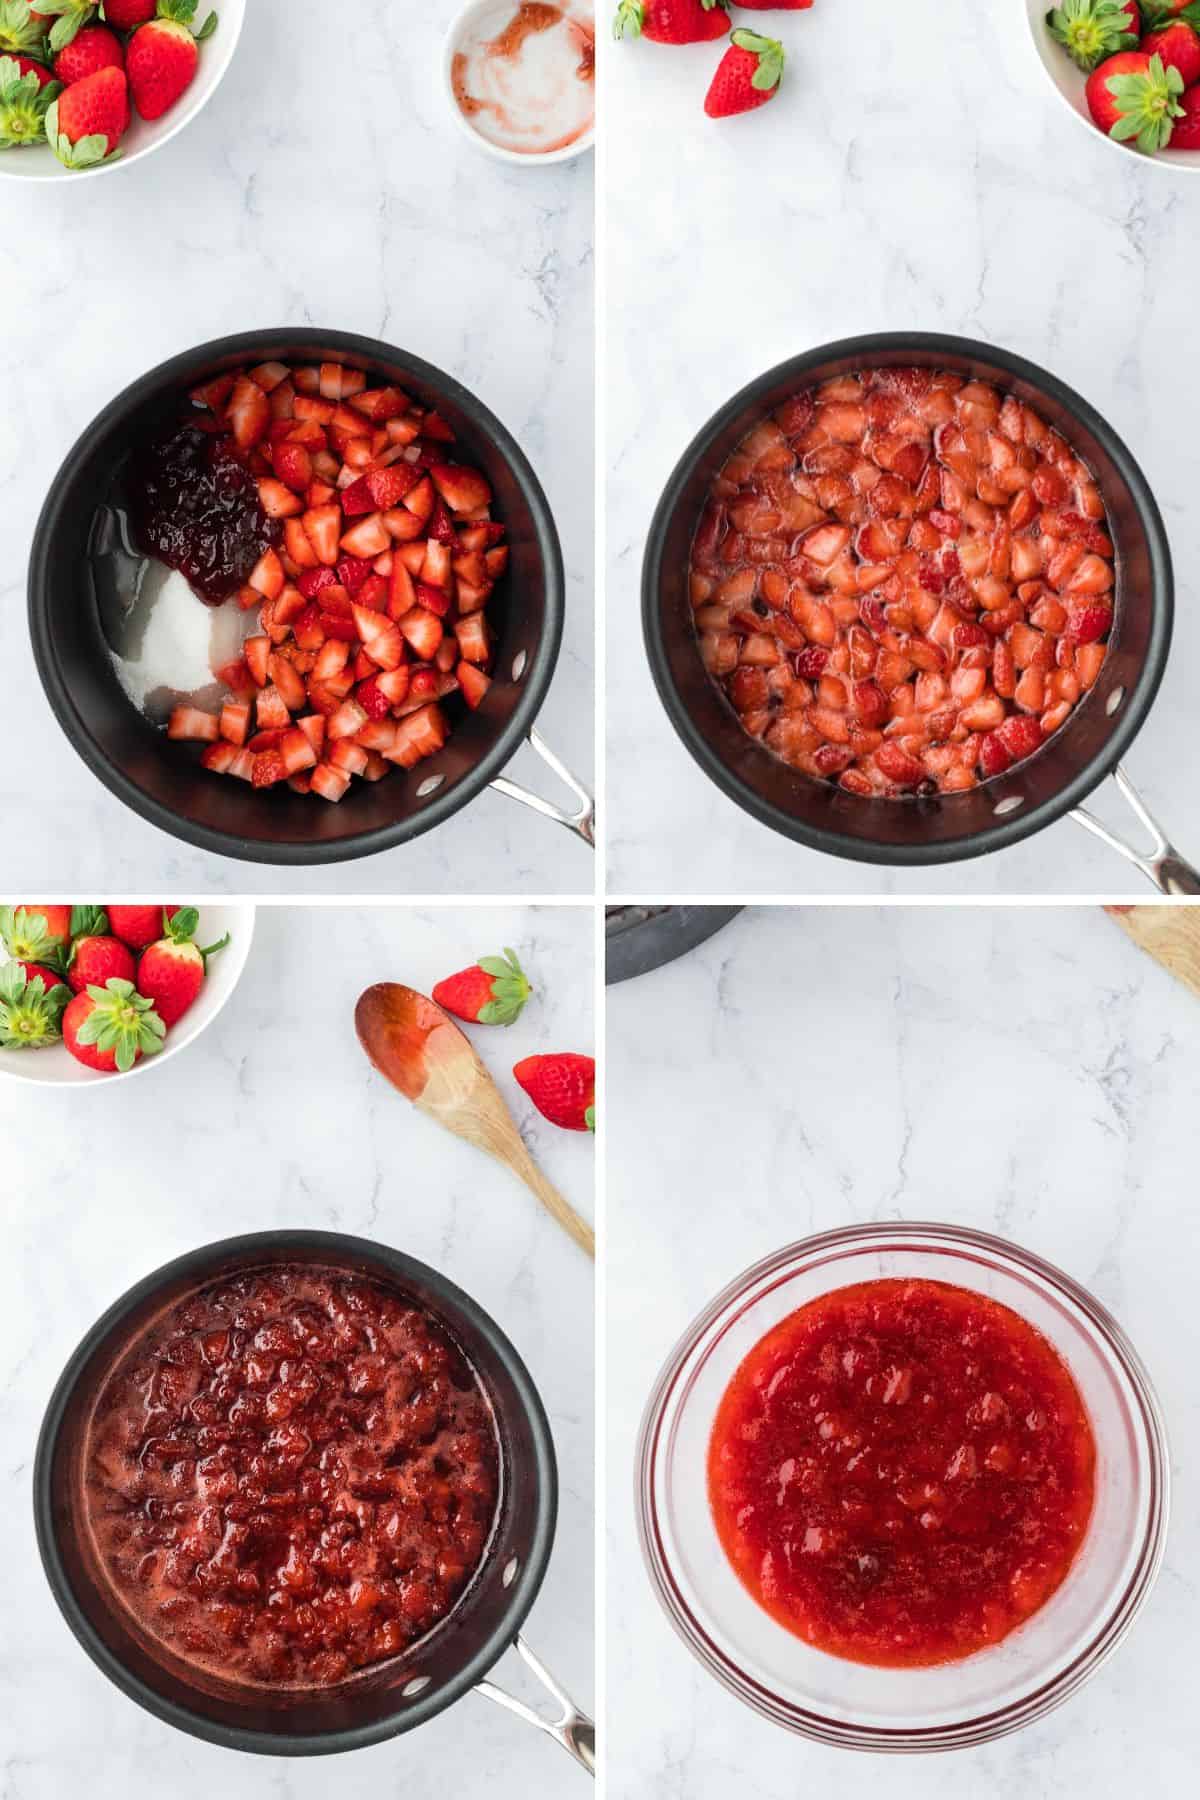 A collage showing the steps for cooking the fresh strawberries.